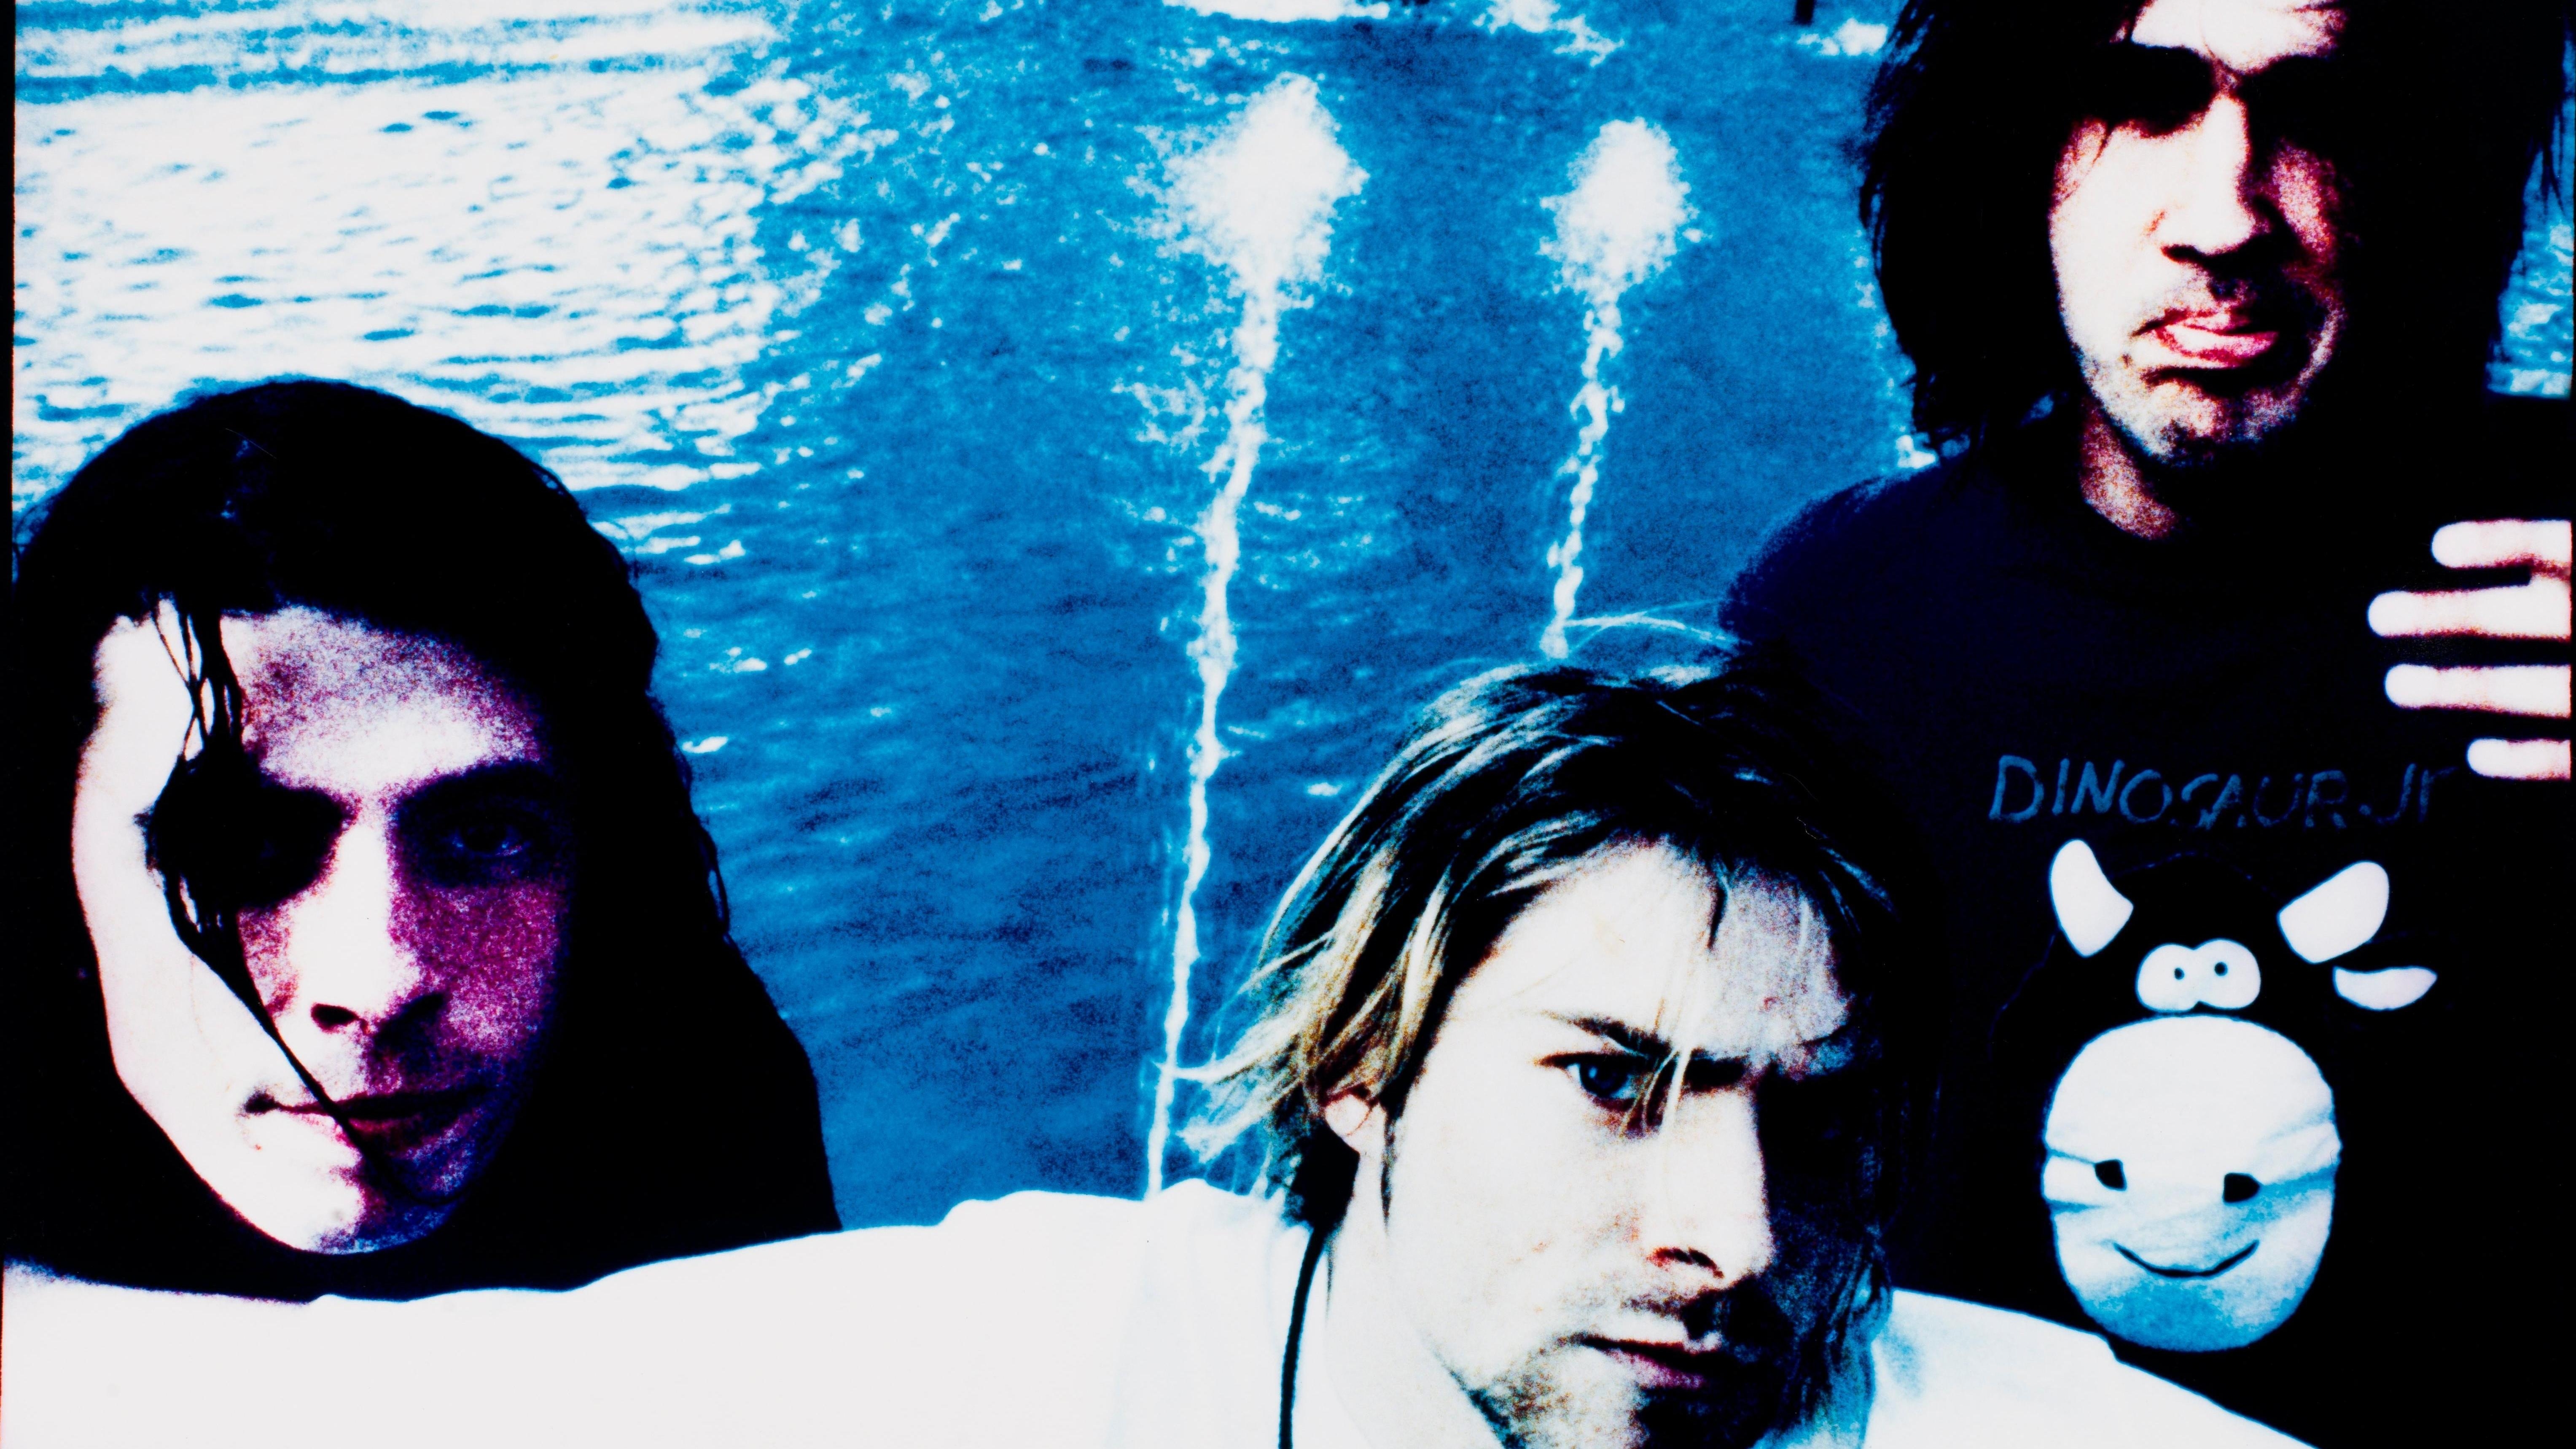 UPDATE: Nirvana responds to Nevermind baby’s refiled lawsuit